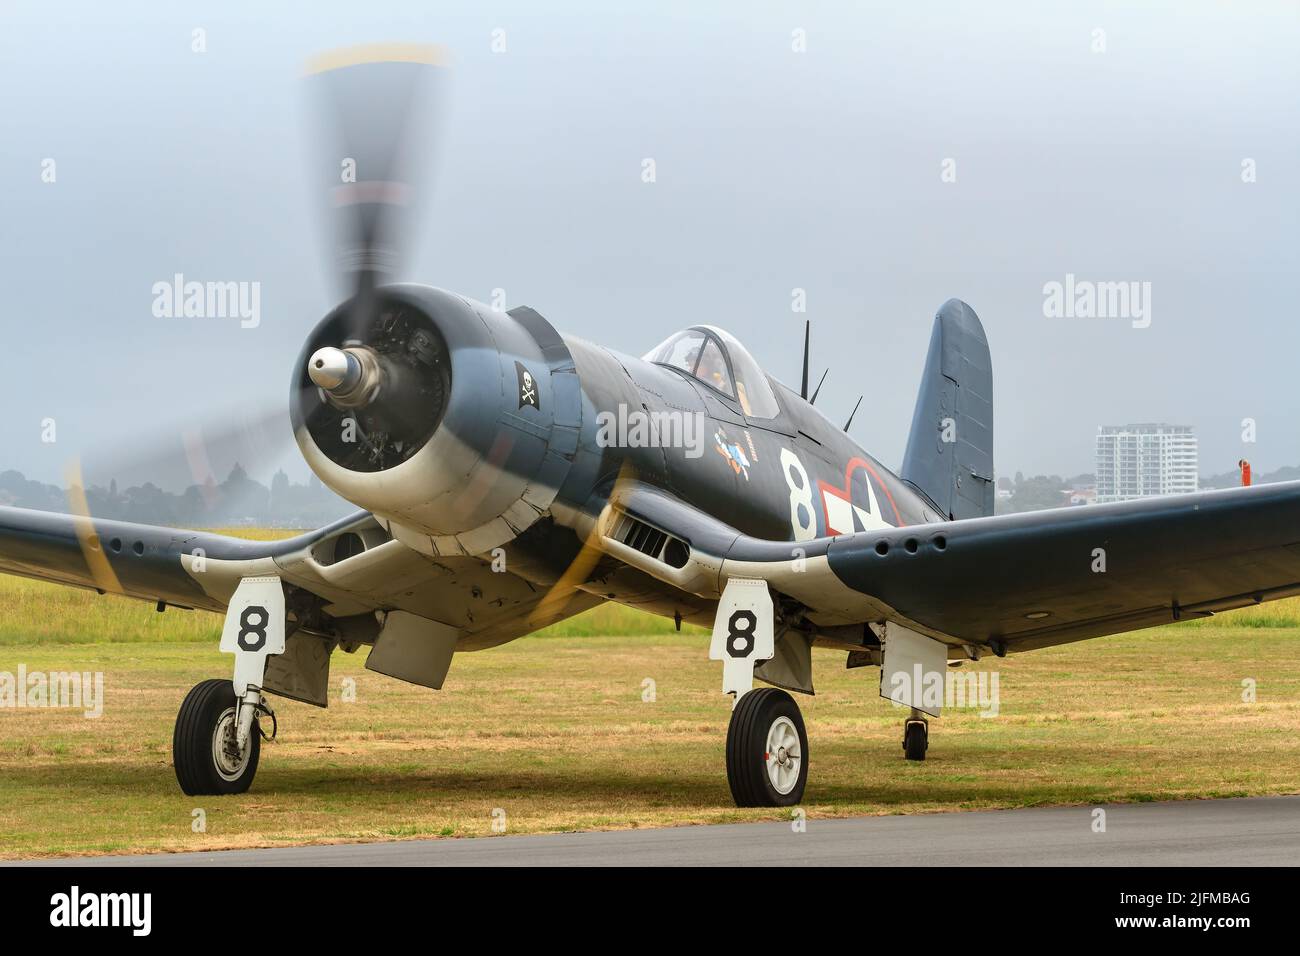 A F4U Corsair, an American fighter aircraft of WW2, on the ground at an airshow Stock Photo